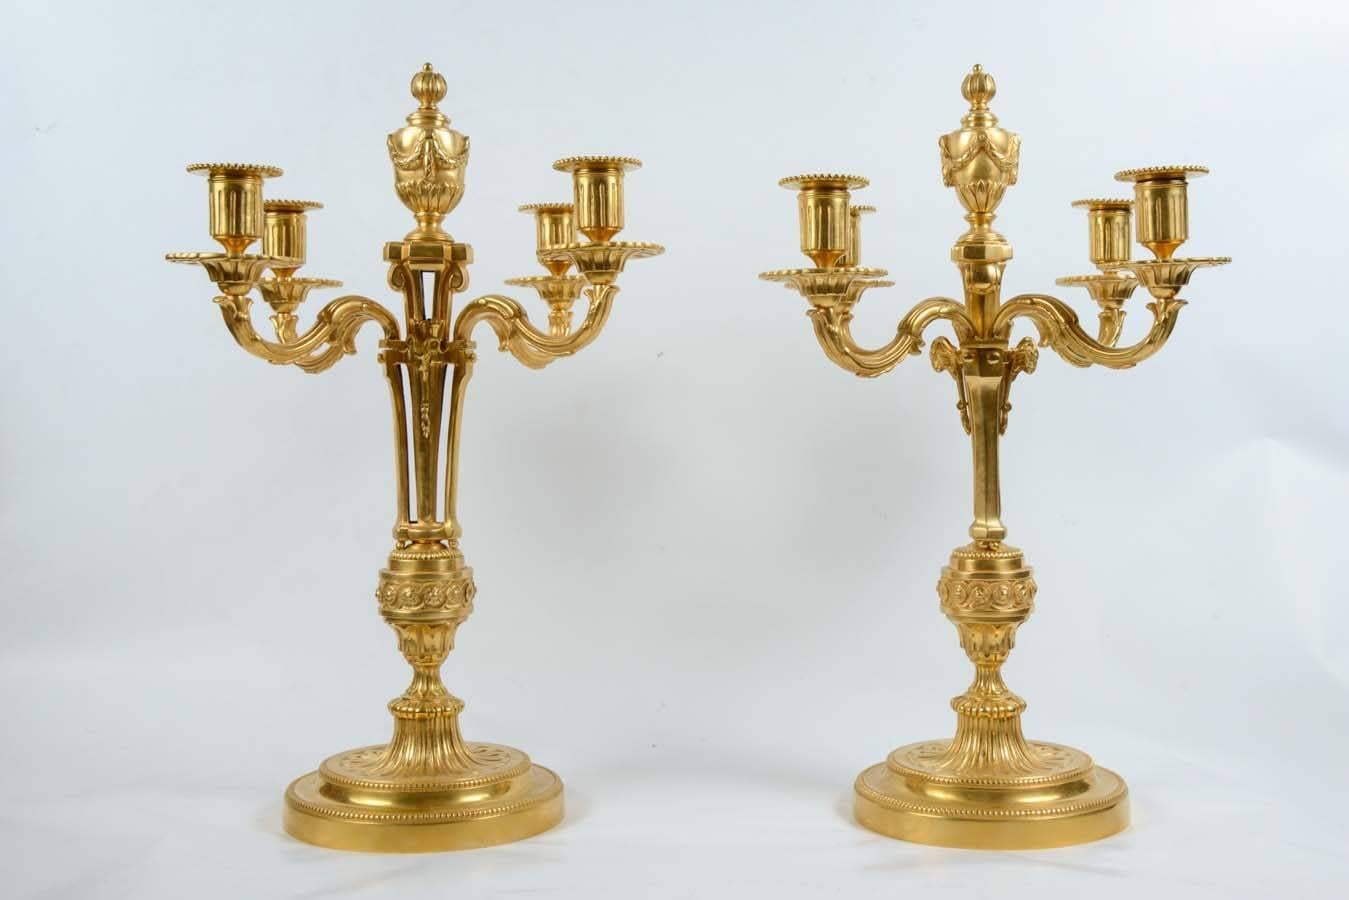 Pair of candelabra, four arms for candles - bronze gilt with real gold.